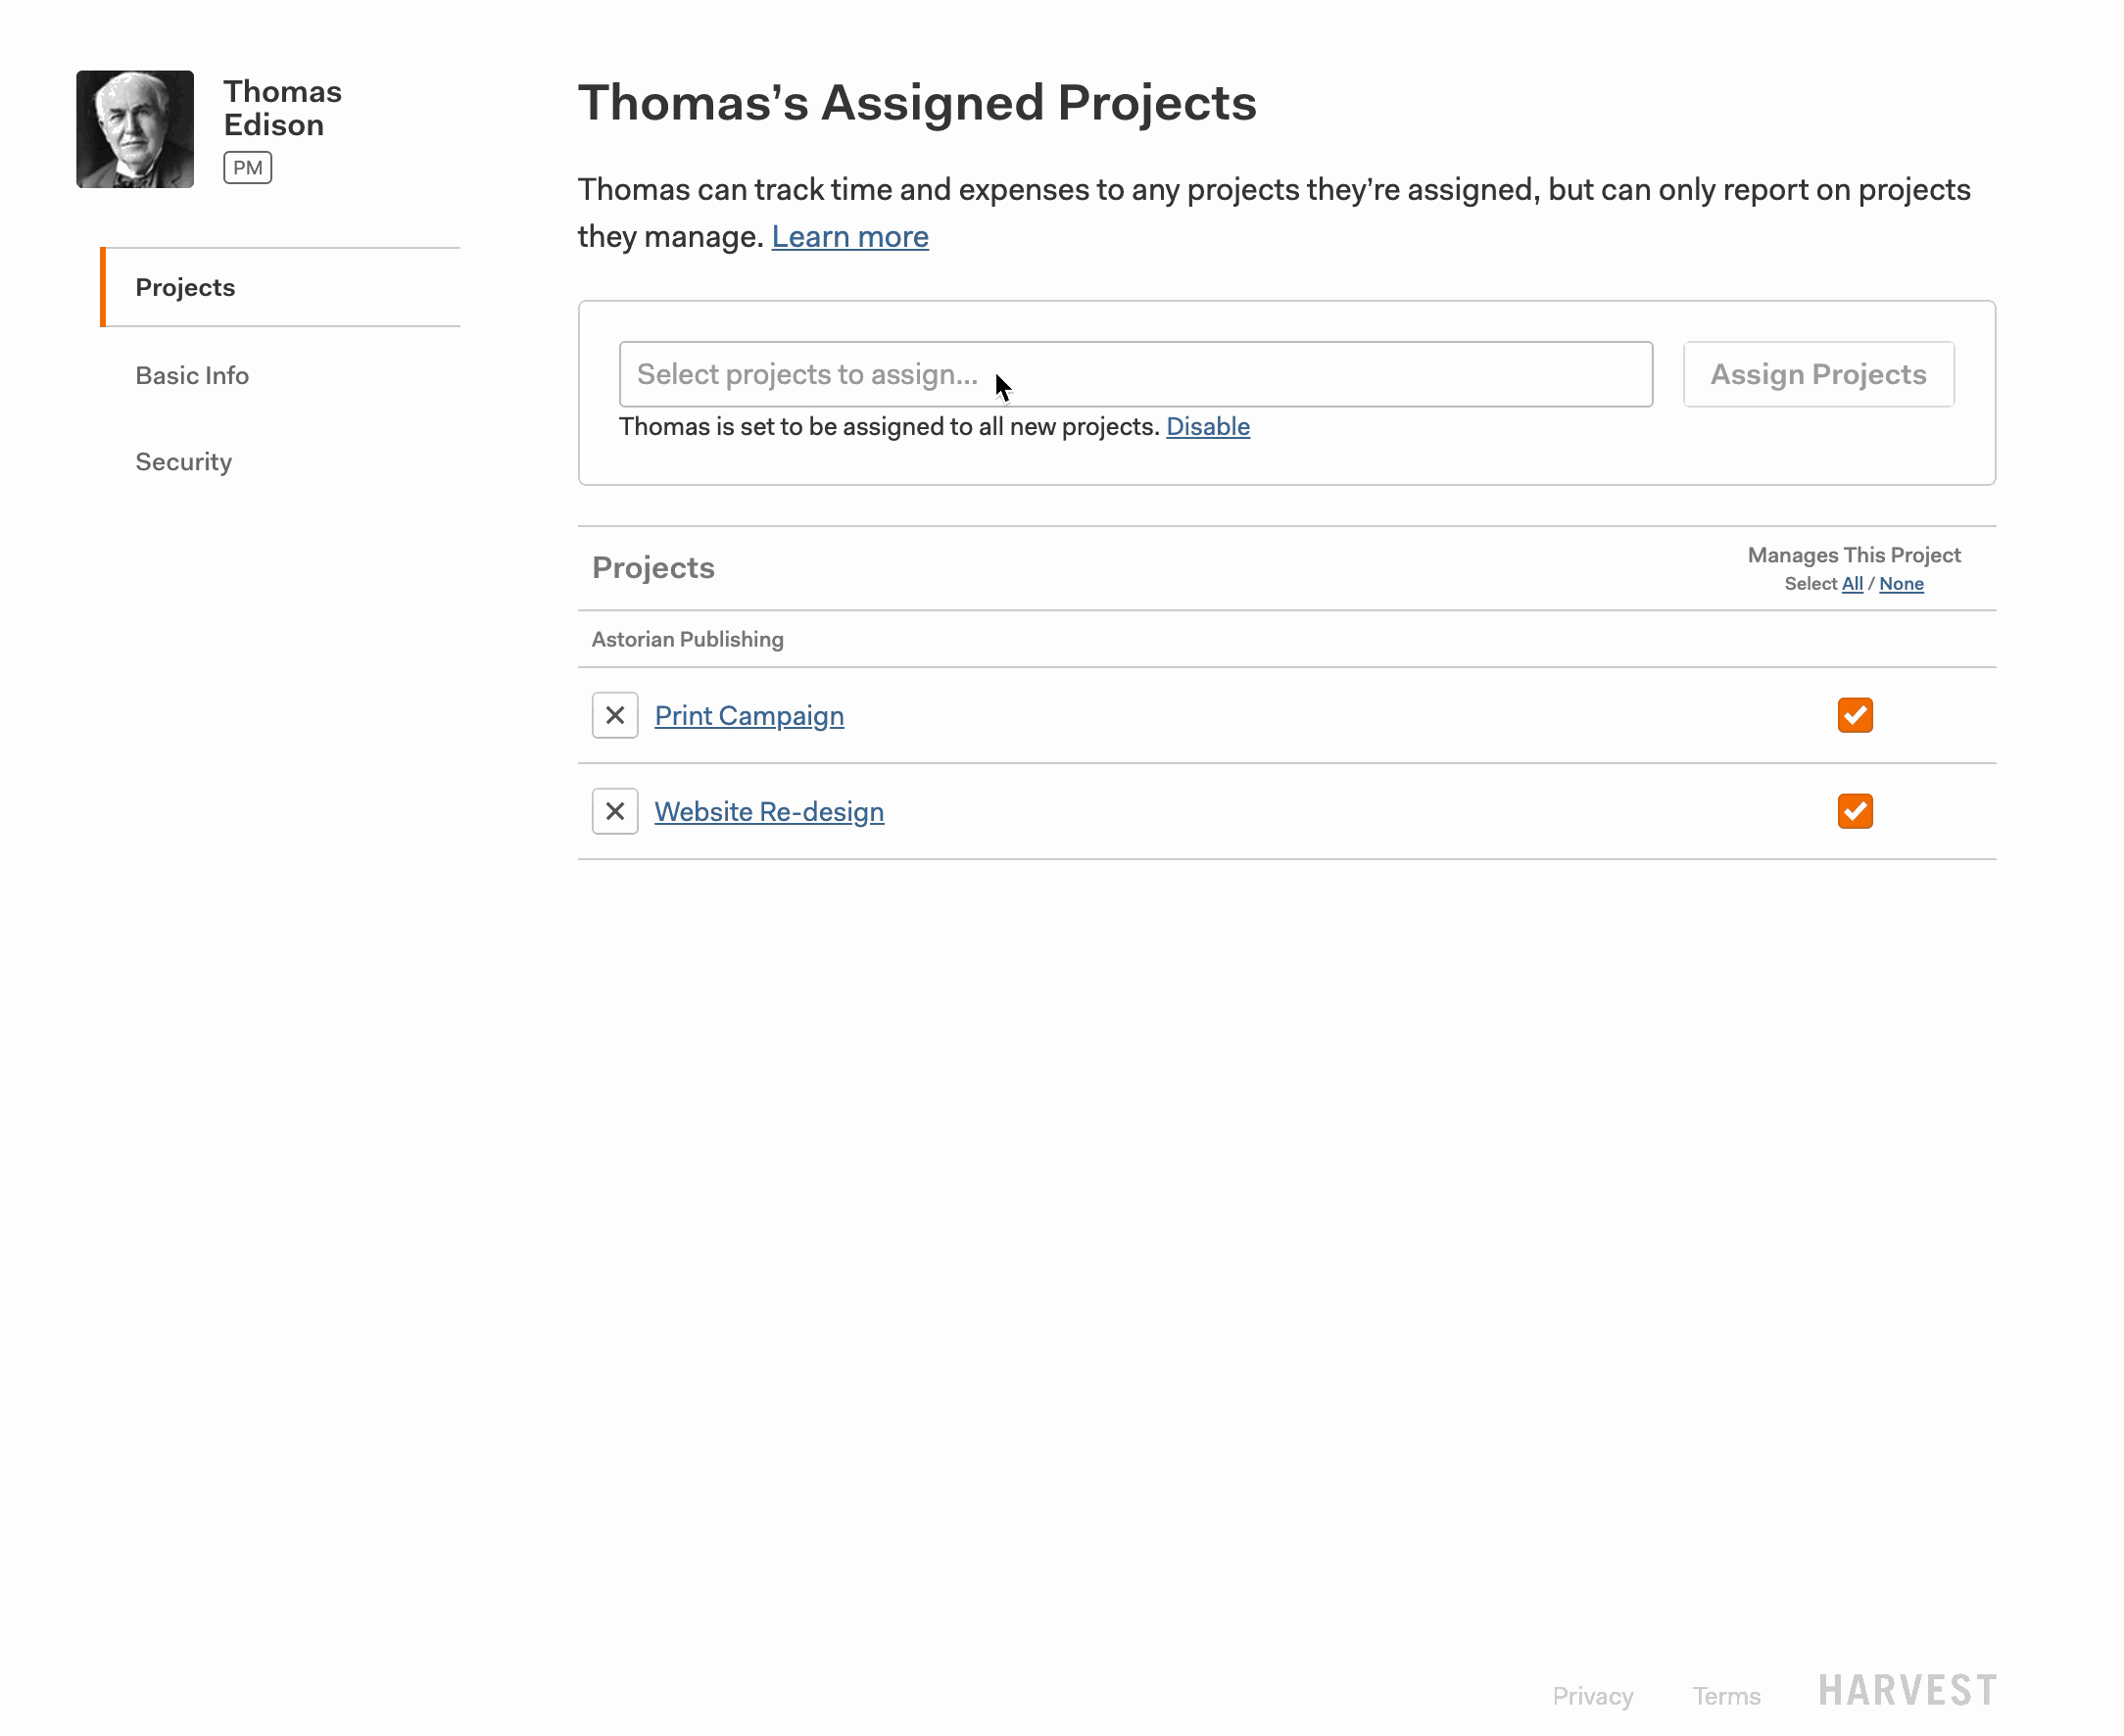 Assign to all projects